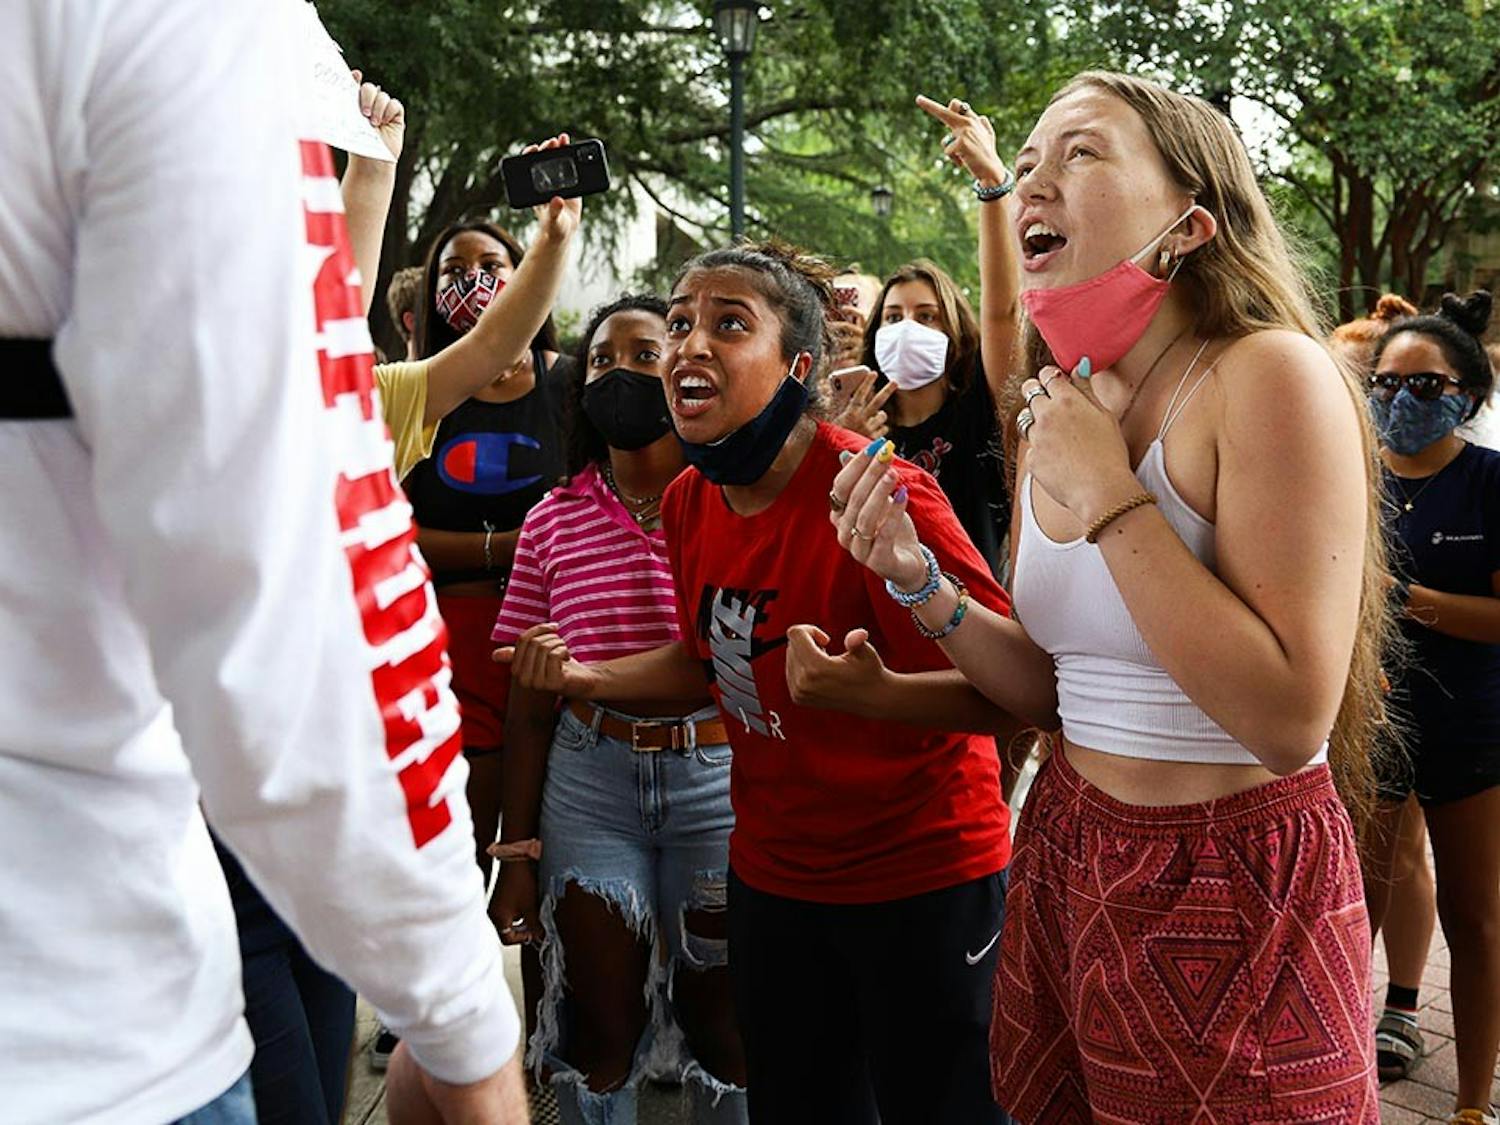 Isabella Jones and a fellow student yell in protest of Jim Gilles' presence on the university’s campus. These students combated remarks made by Jim Gilles, and many students yelled in agreement.